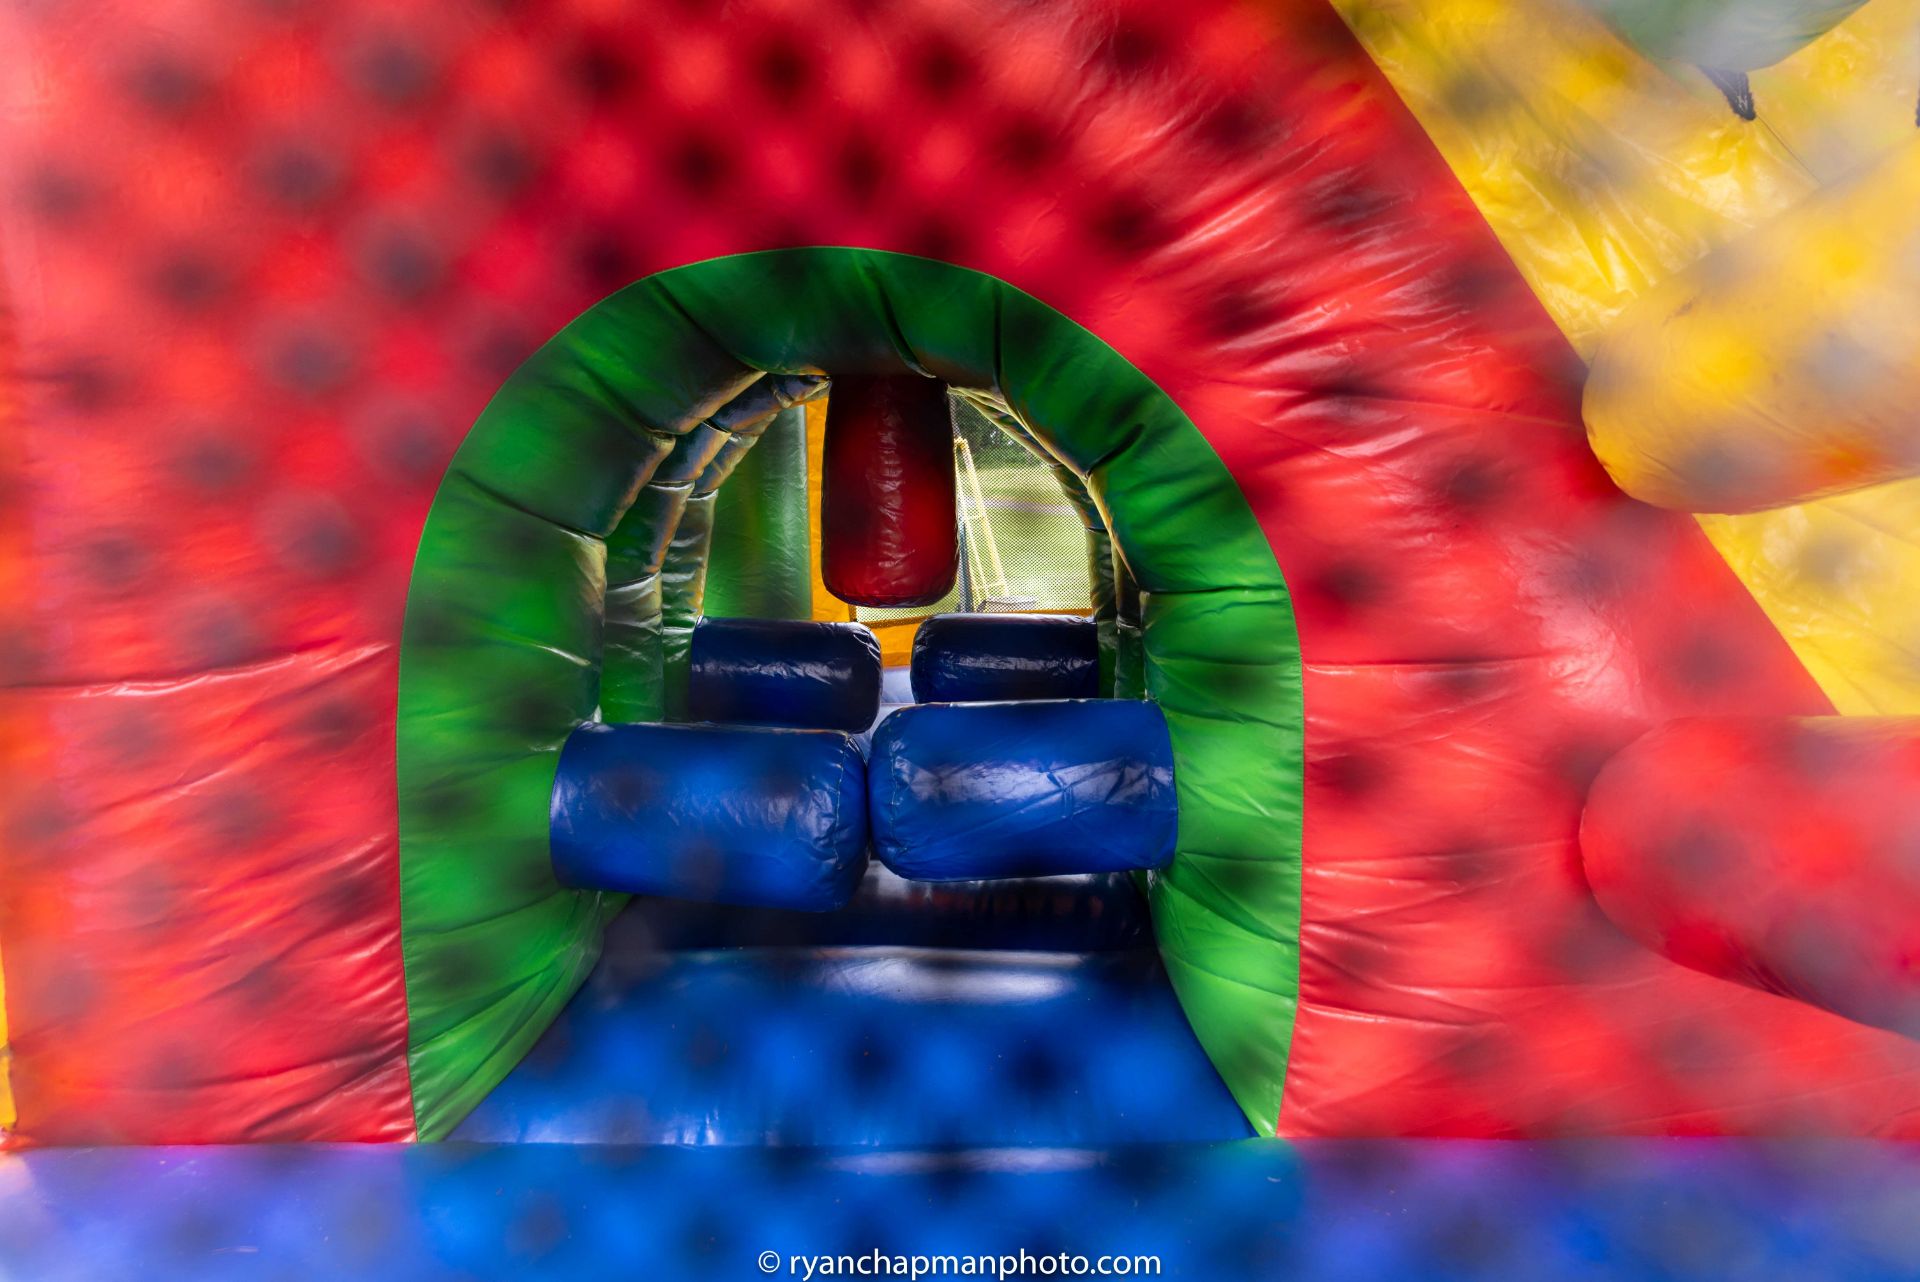 TROPICAL ISLAND OBSTACLE SLIDE INFLATABLE - (LOCATED AT TELFORD, PA) - Image 3 of 5